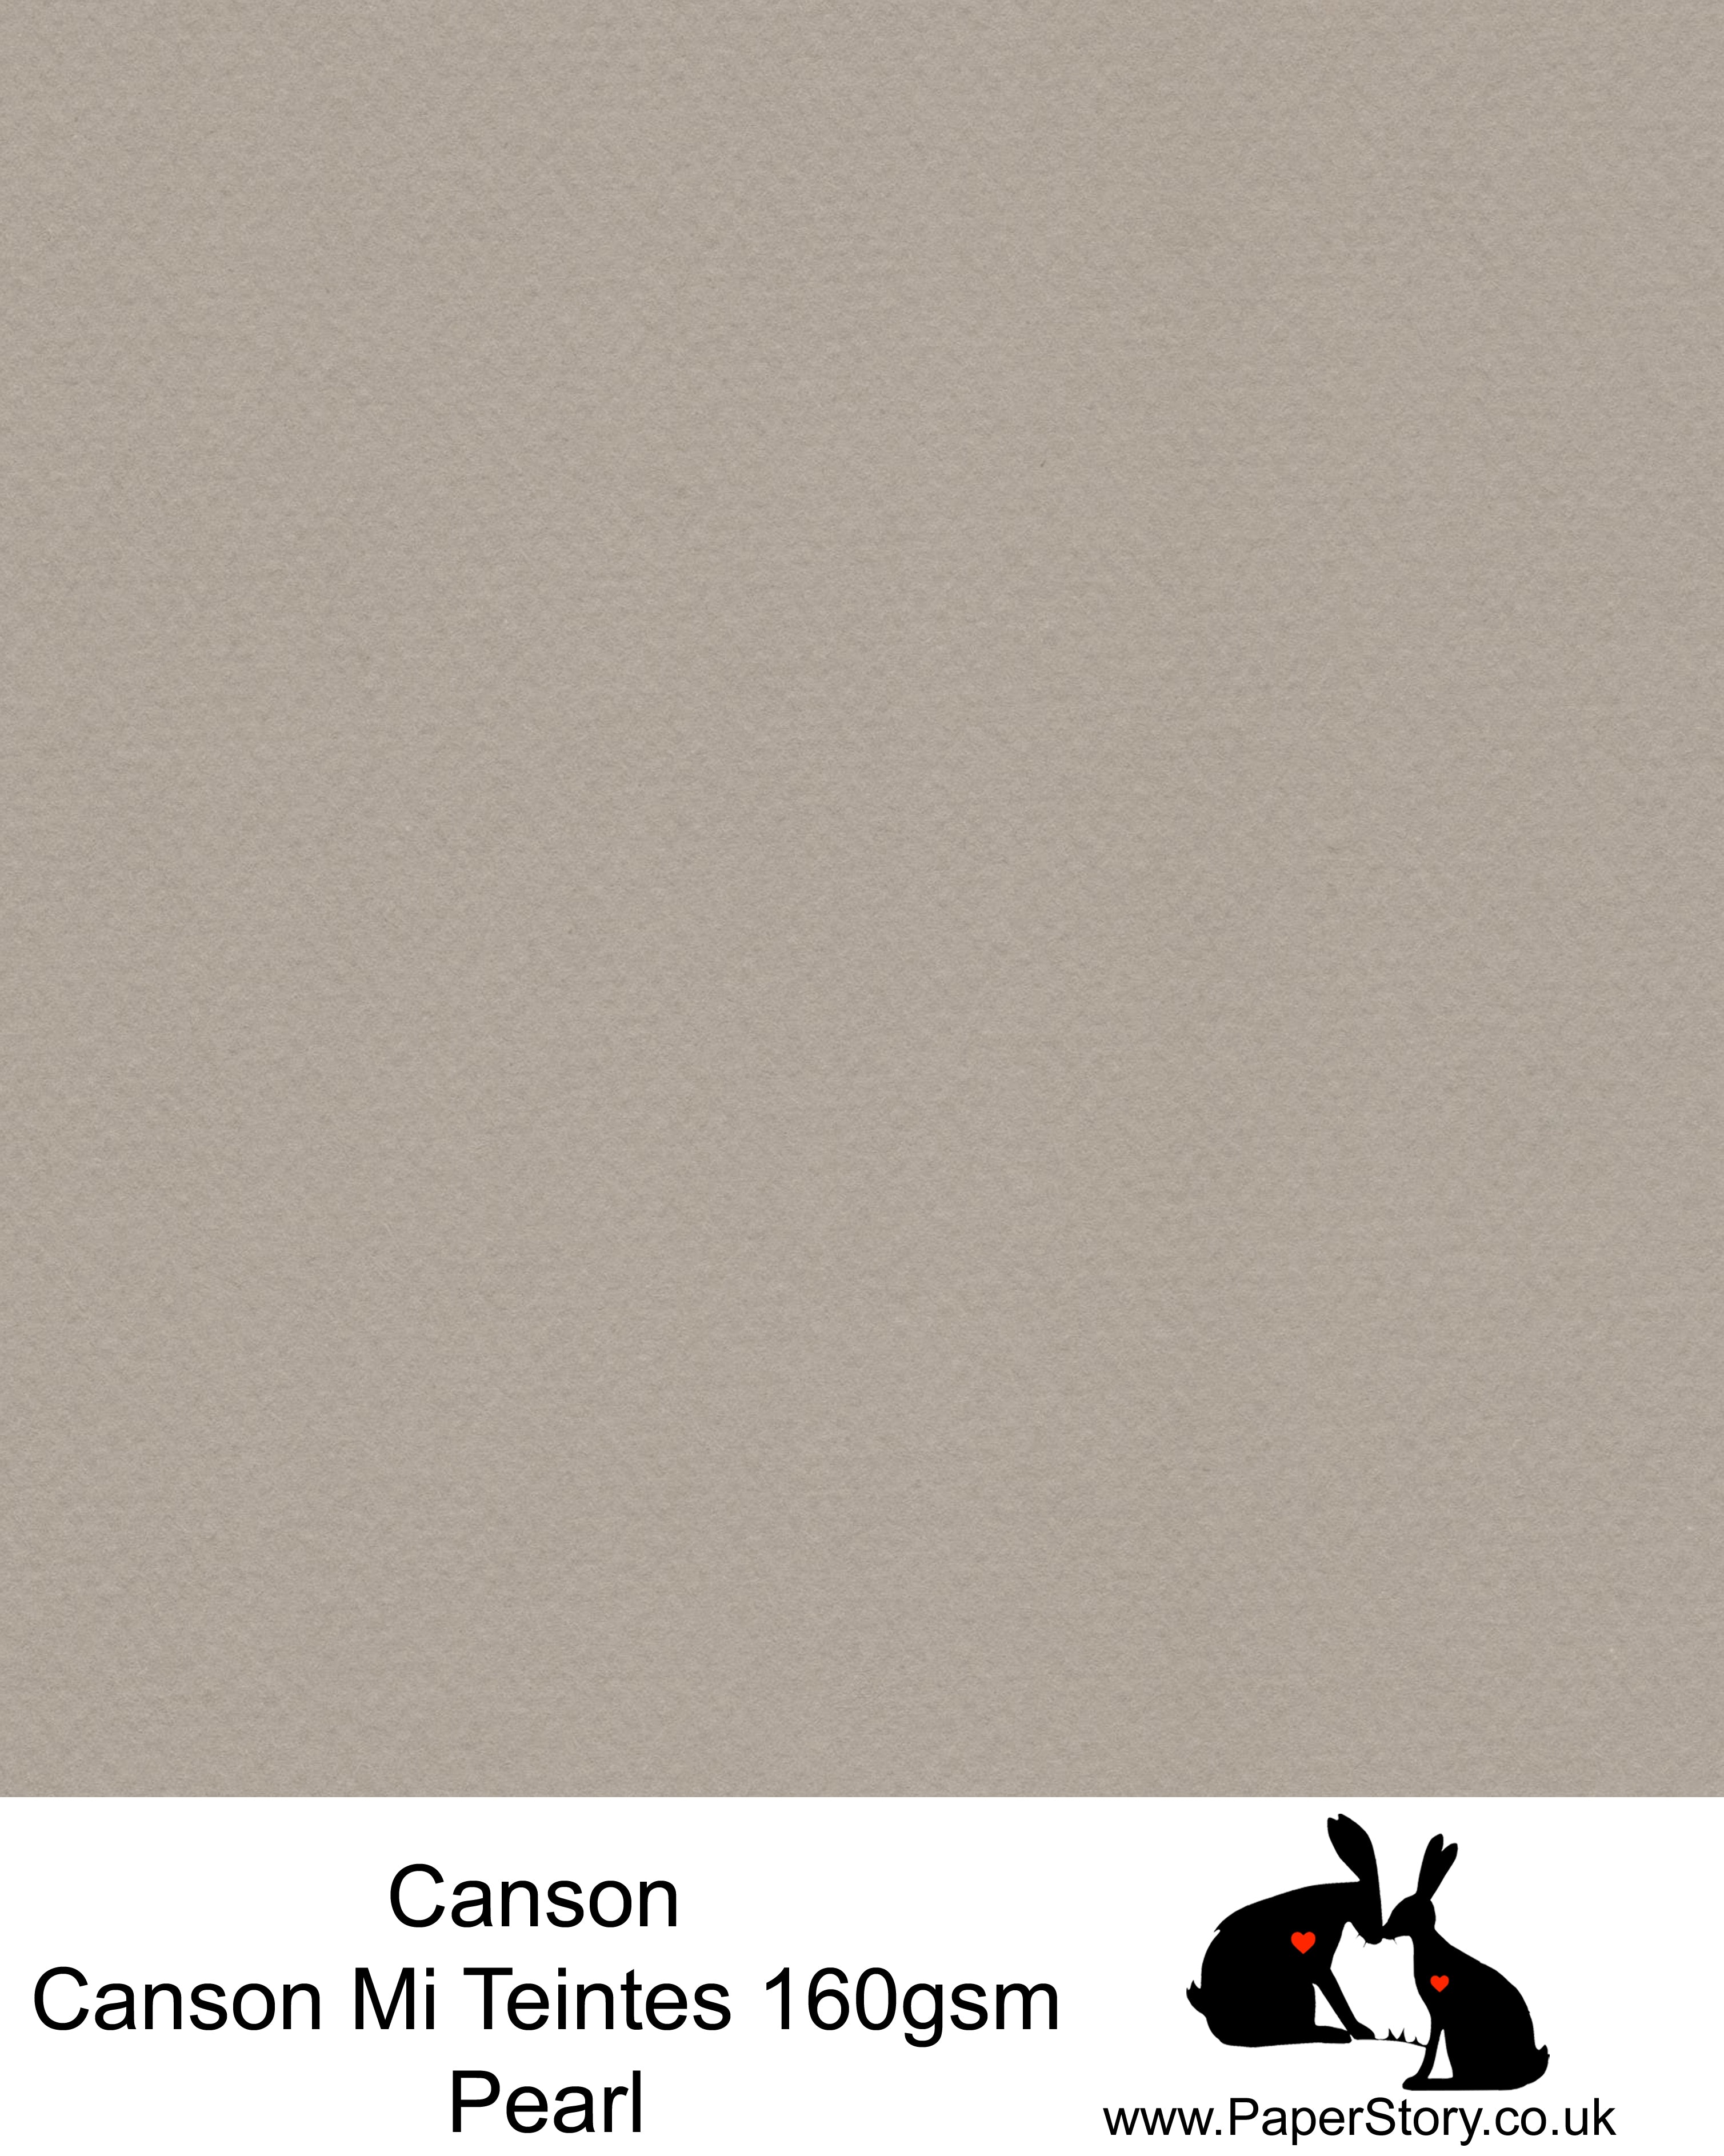 Canson Mi Teintes acid free, Pearl, mid tone grey, hammered texture honeycomb surface paper 160 gsm. This is a popular and classic paper for all artists especially well respected for Pastel  and Papercutting made famous by Paper Panda. This paper has a honeycombed finish one side and fine grain the other. An authentic art paper, acid free with a  very high 50% cotton content. Canson Mi-Teintes complies with the ISO 9706 standard on permanence, a guarantee of excellent conservation  